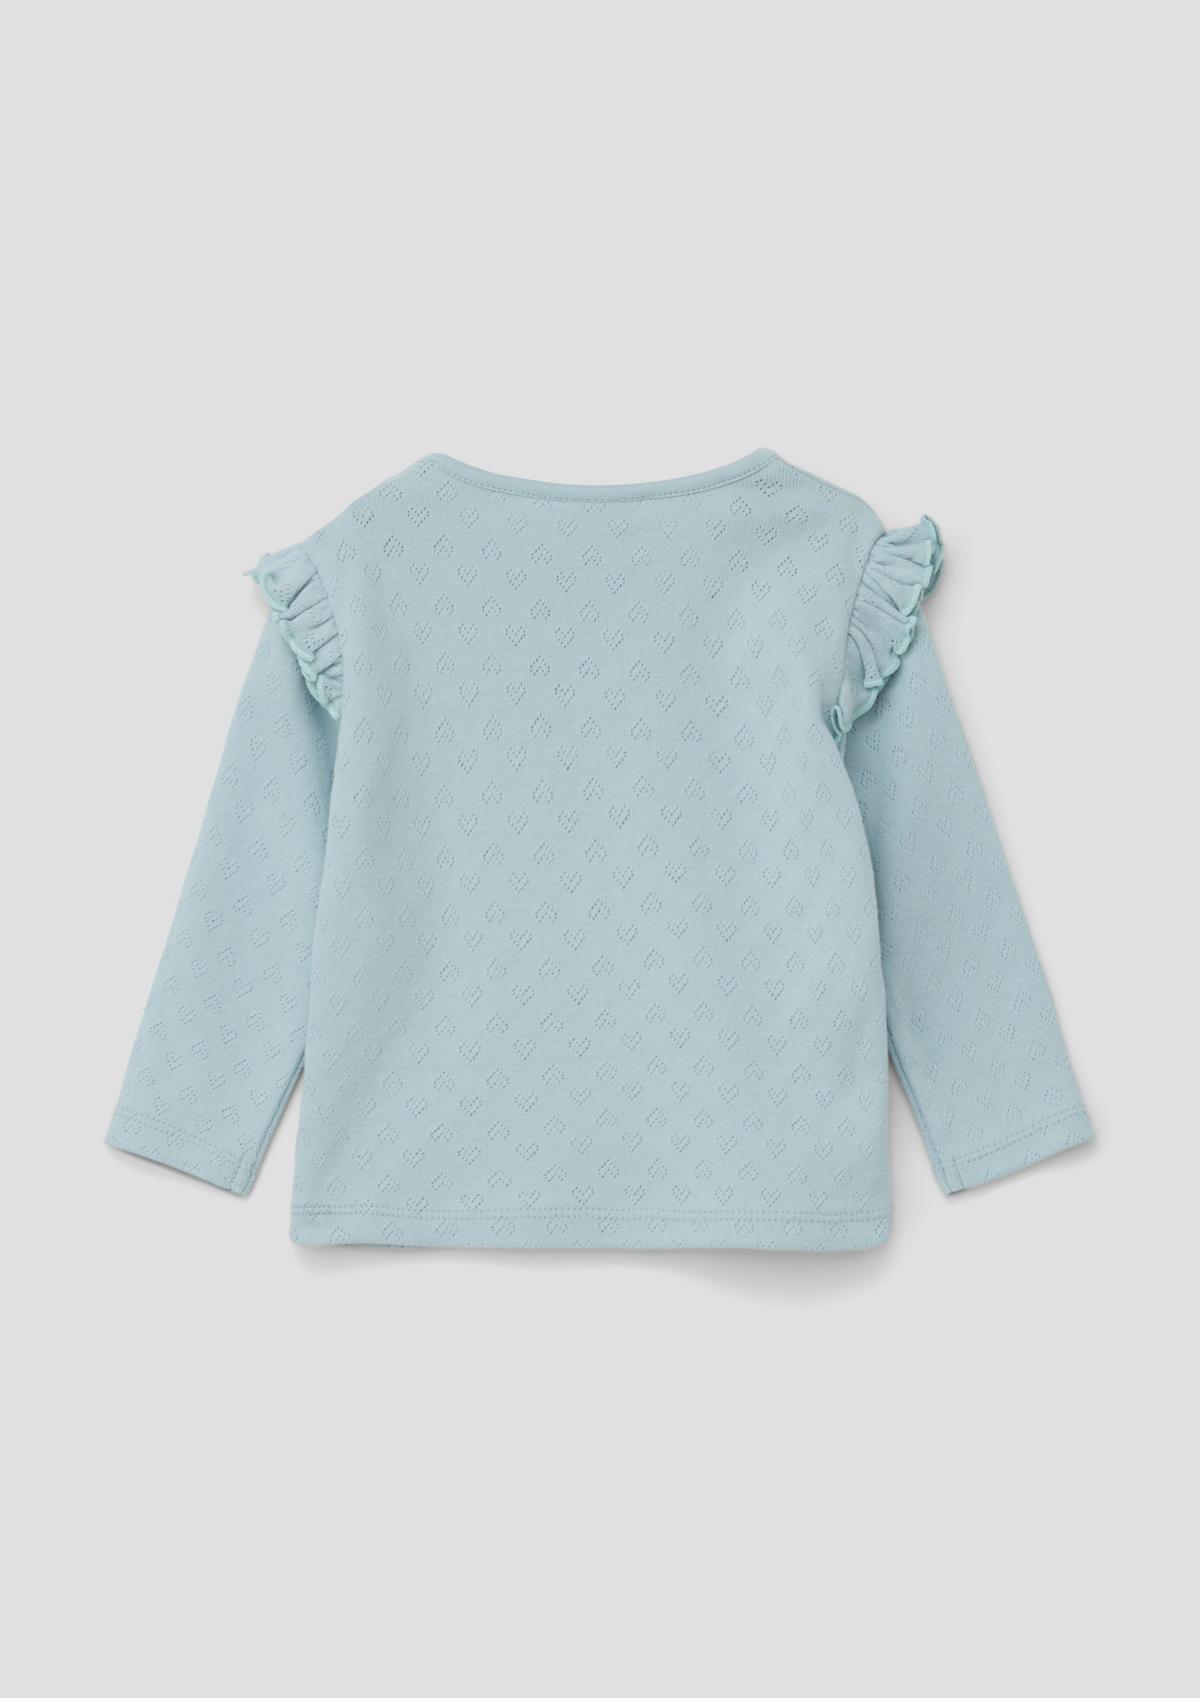 s.Oliver Top with a textured pattern